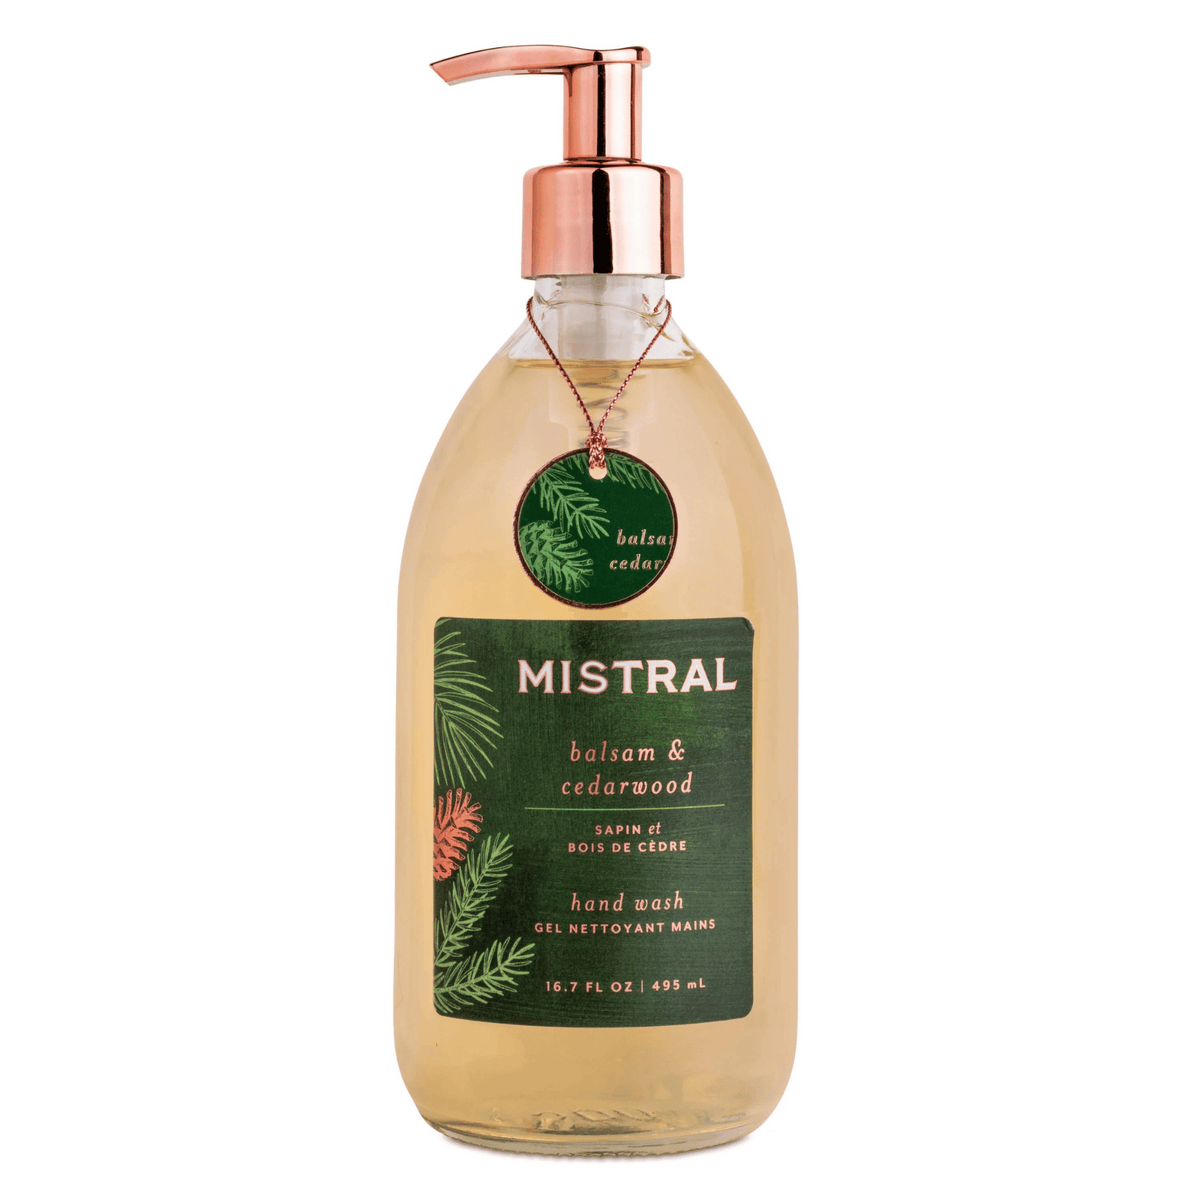 Primary Image of Balsam and Cedarwood Hand Wash